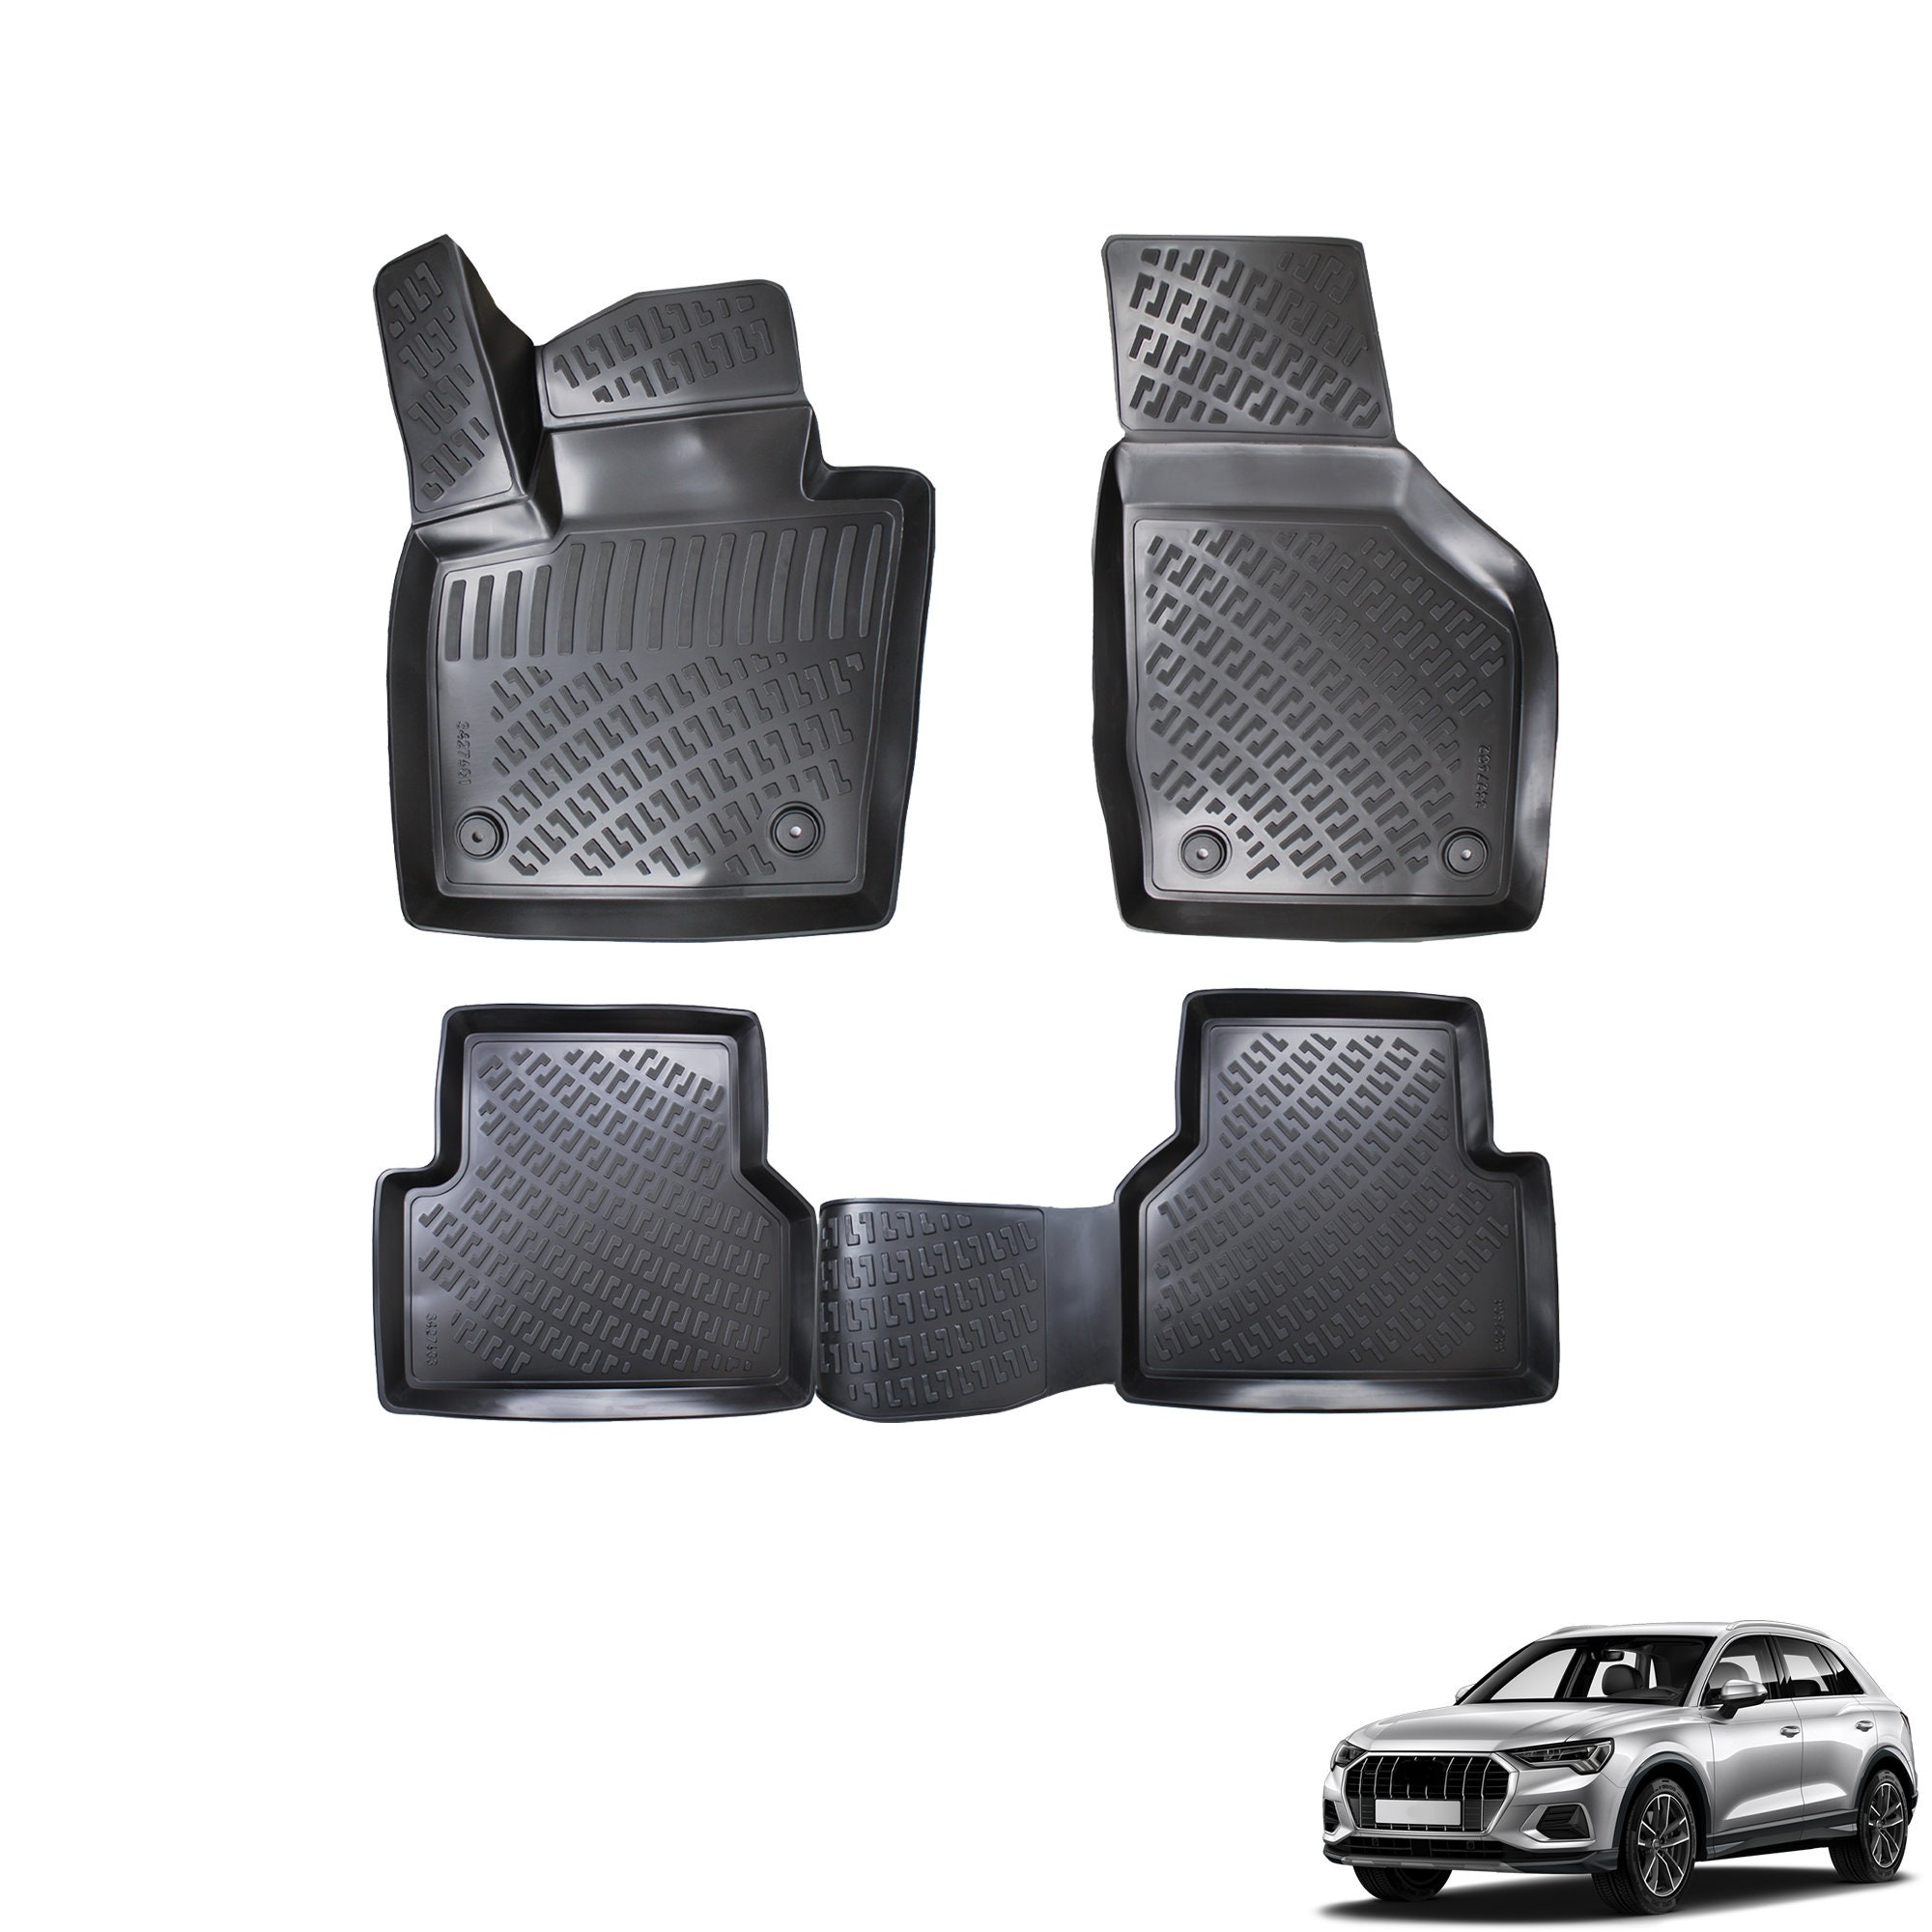 Domed V2 Inserts for Weathertech Floor Mats (Single) - Fits Mercedes  Vehicles